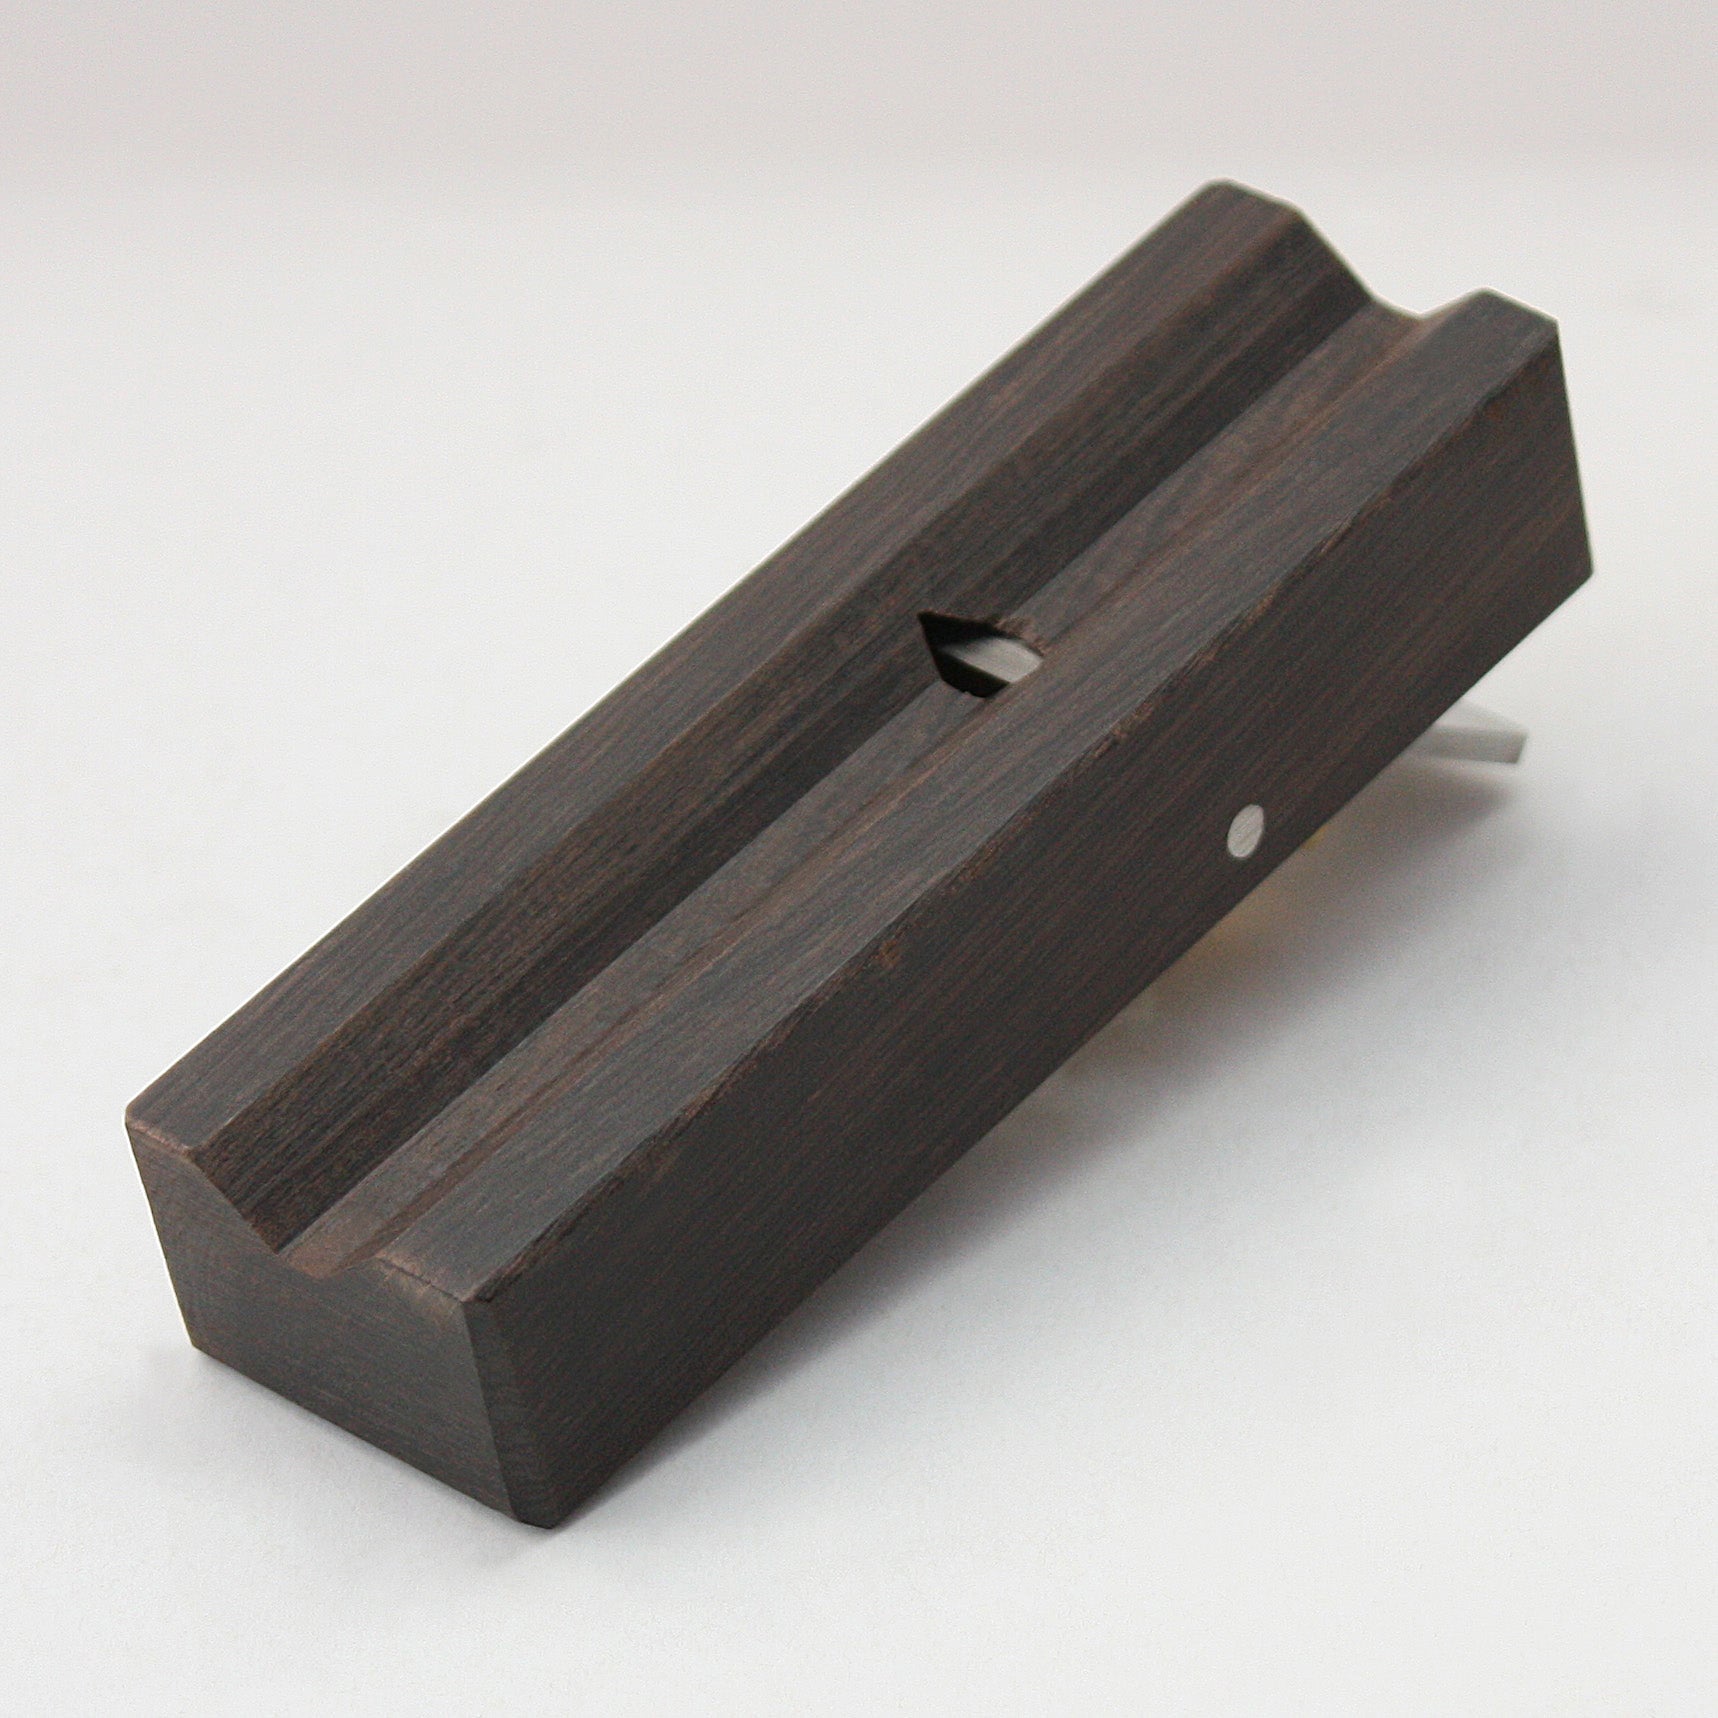 45 degree cut with this japanese mini hand plane is so great! Grab yours today at www.topclassgears.com